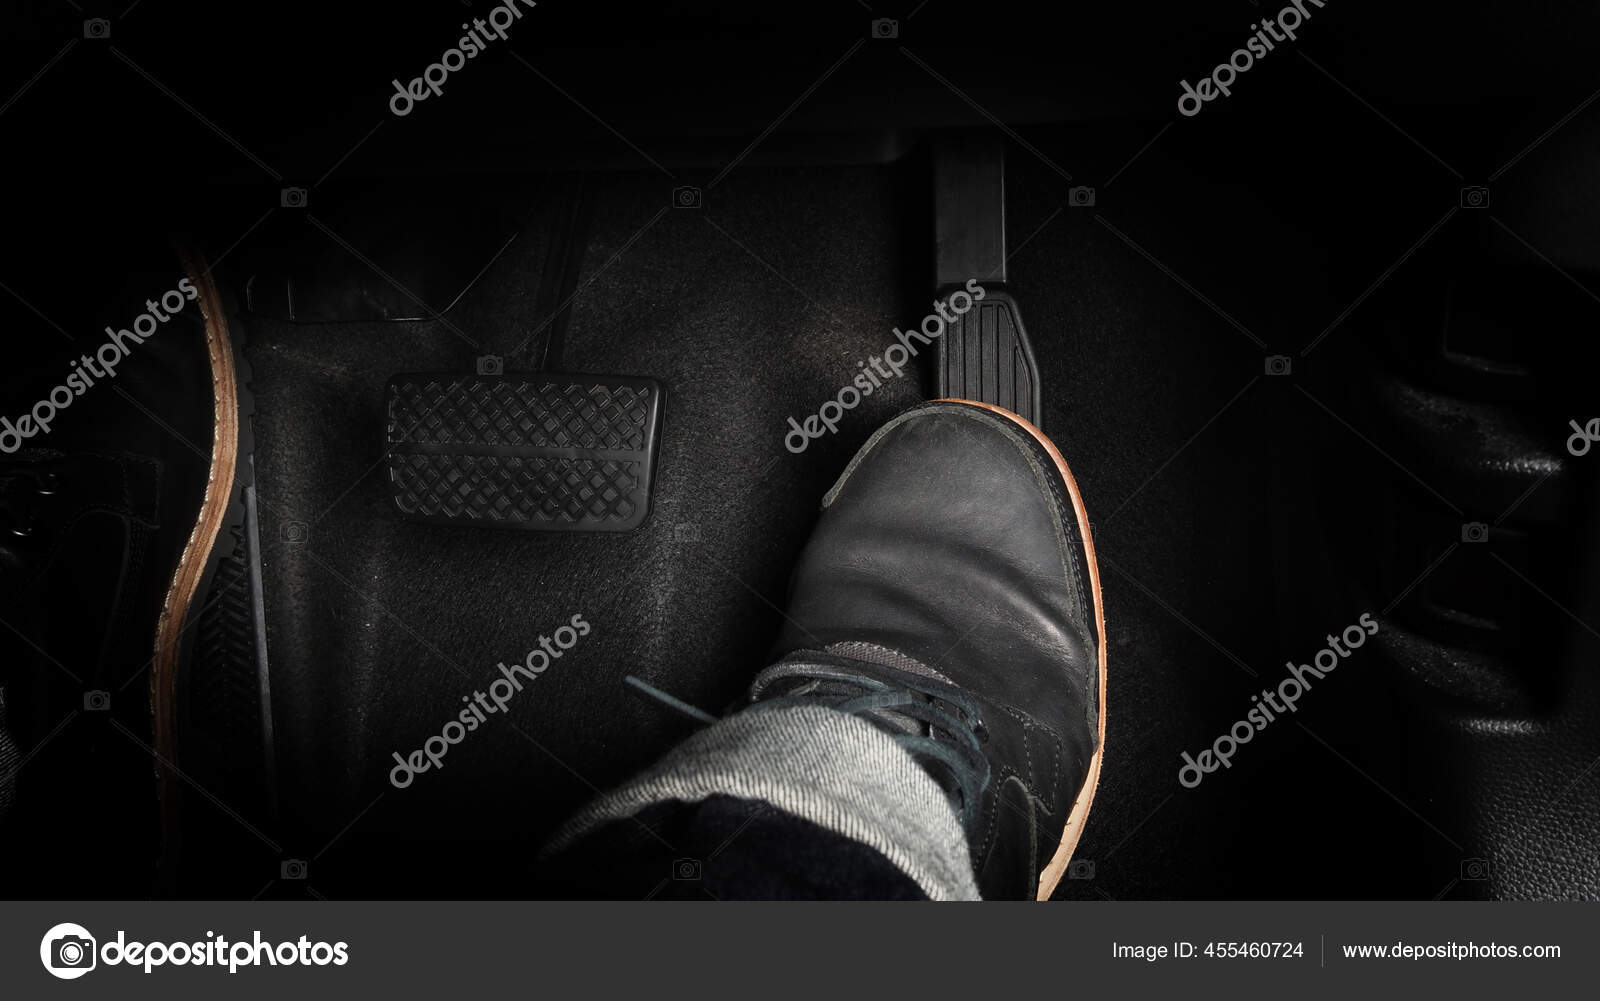 Accelerator And Breaking Pedal In A Car Close Up The Foot Pressing Foot  Pedal Of A Car To Drive Ahead Driver Driving The Car By Pushing Accelerator  Pedals Of The Car Inside